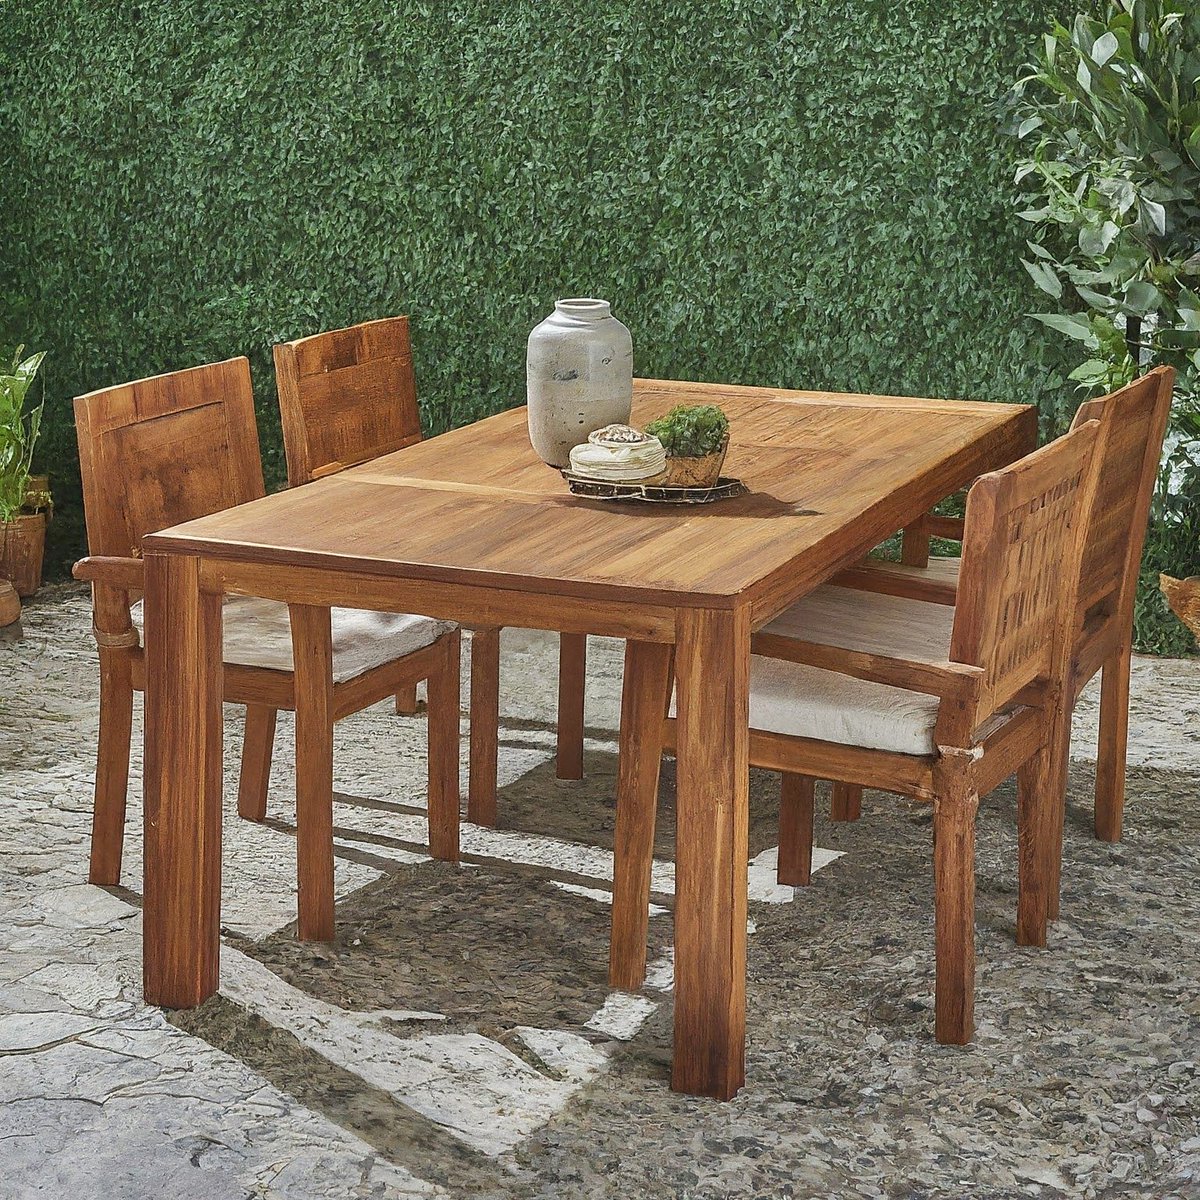 Check out the beautiful Acacia Wood Outdoor Dining Set available on sunlitbackyardoasis.com! Perfect for enjoying meals outside in style. #outdoorfurniture #diningset #sunlitbackyardoasis